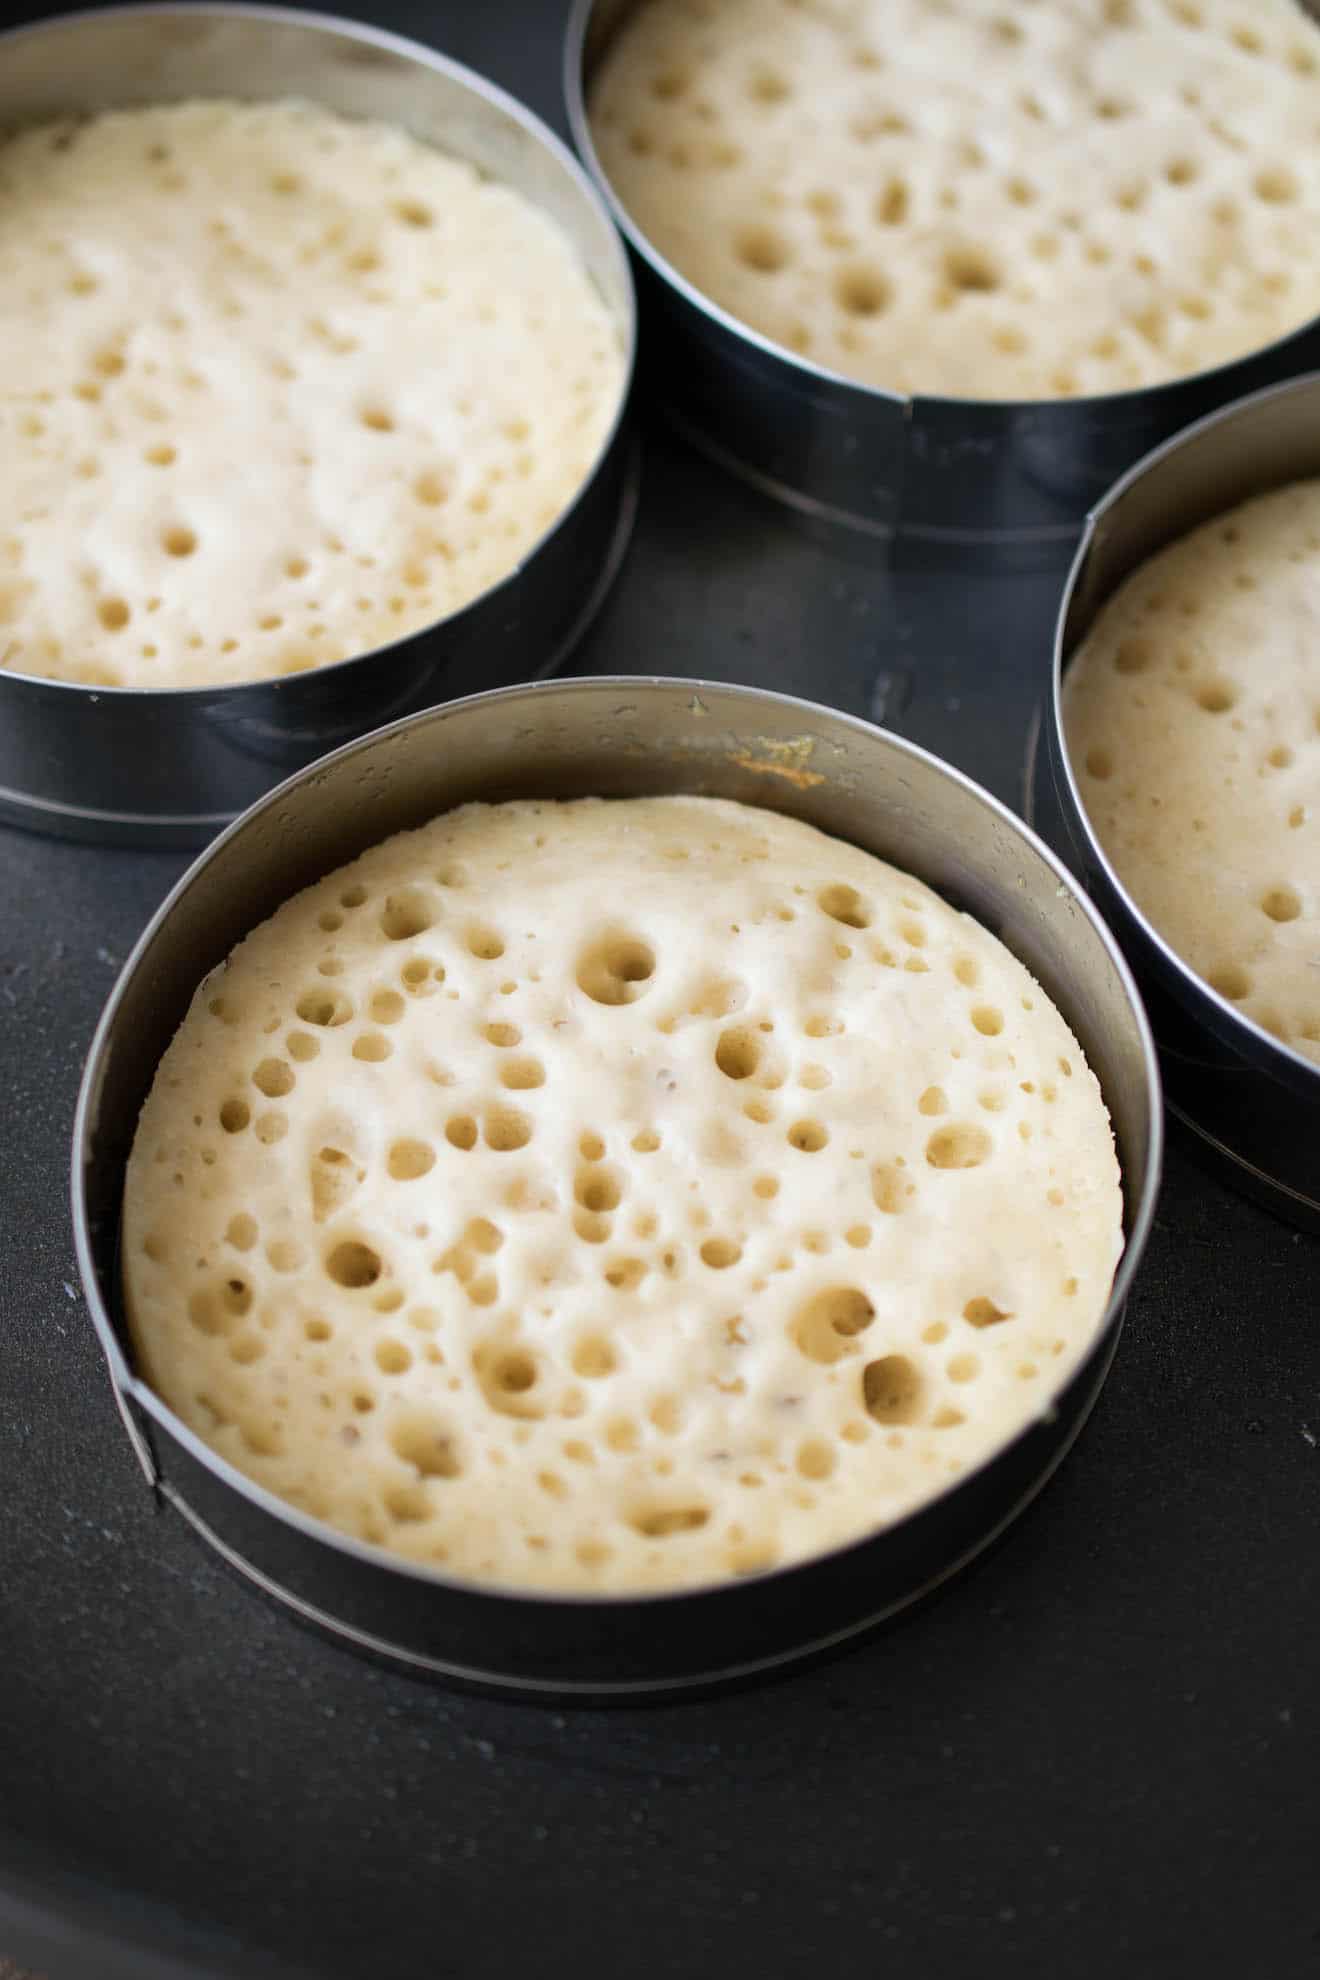 Crumpet dough in ring molds cooking in a pan showing the holes